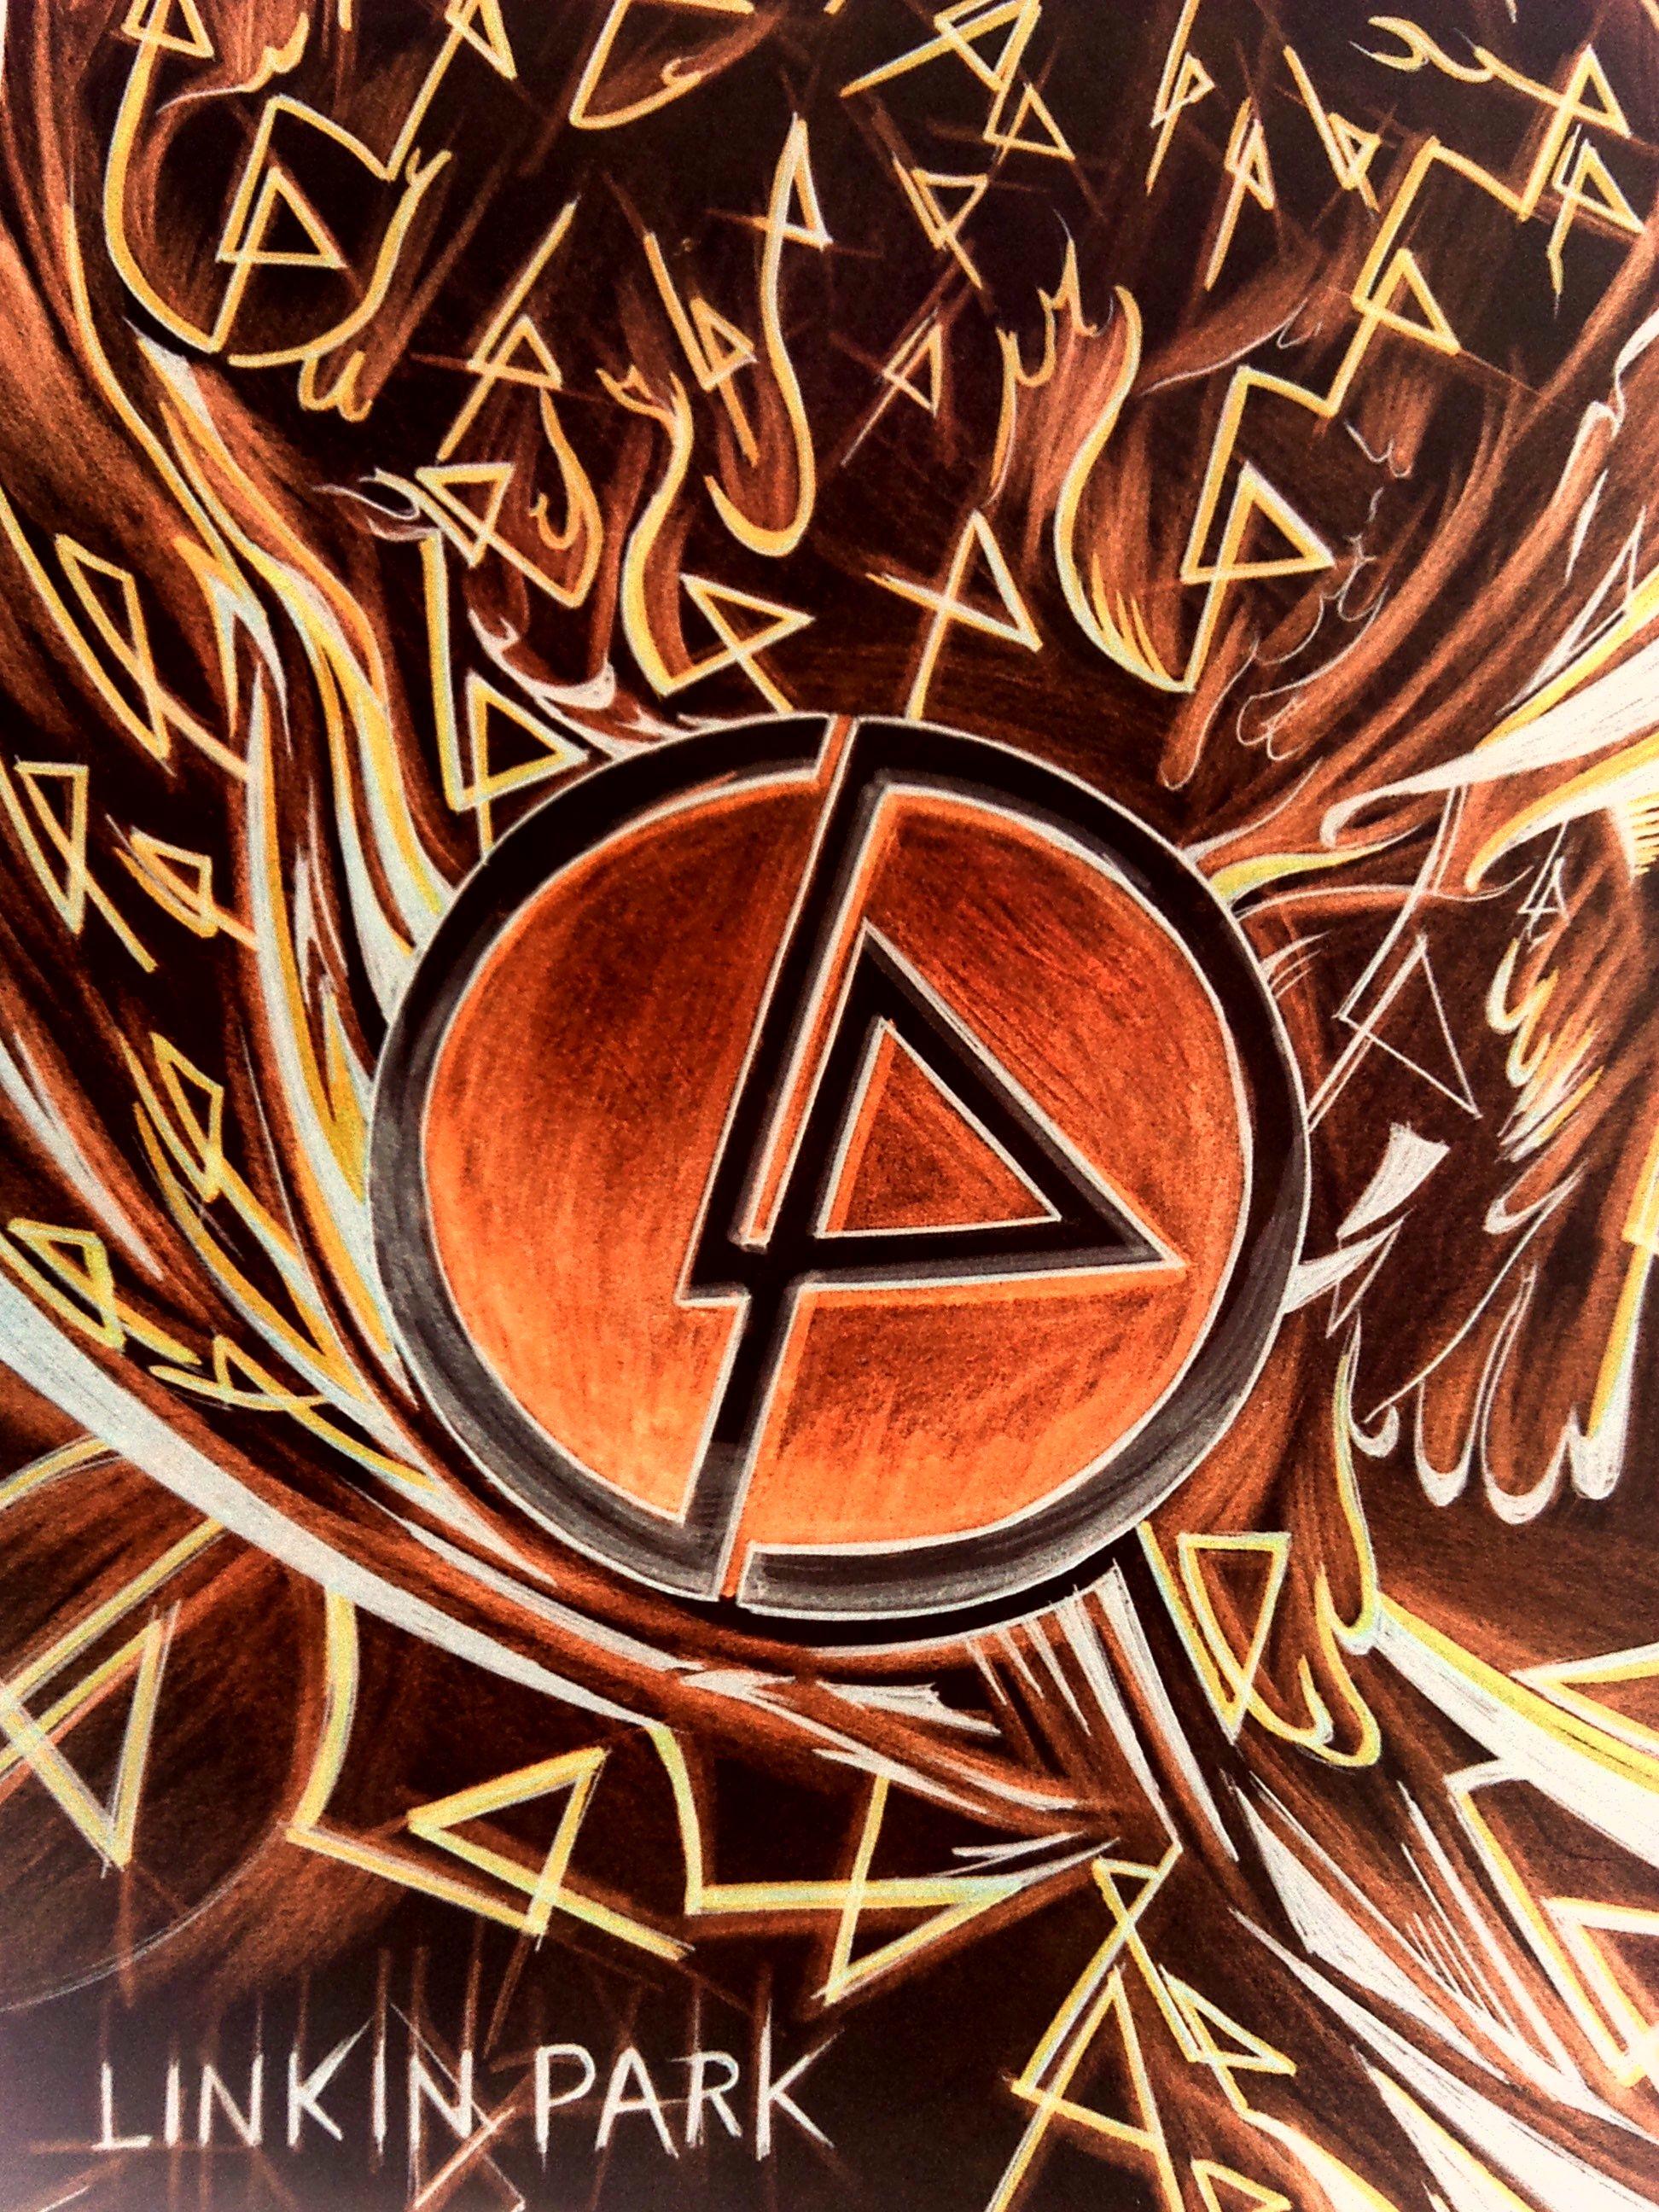 Linkin Park Logo By Imad. Linkin Park, Linkin Park Chester